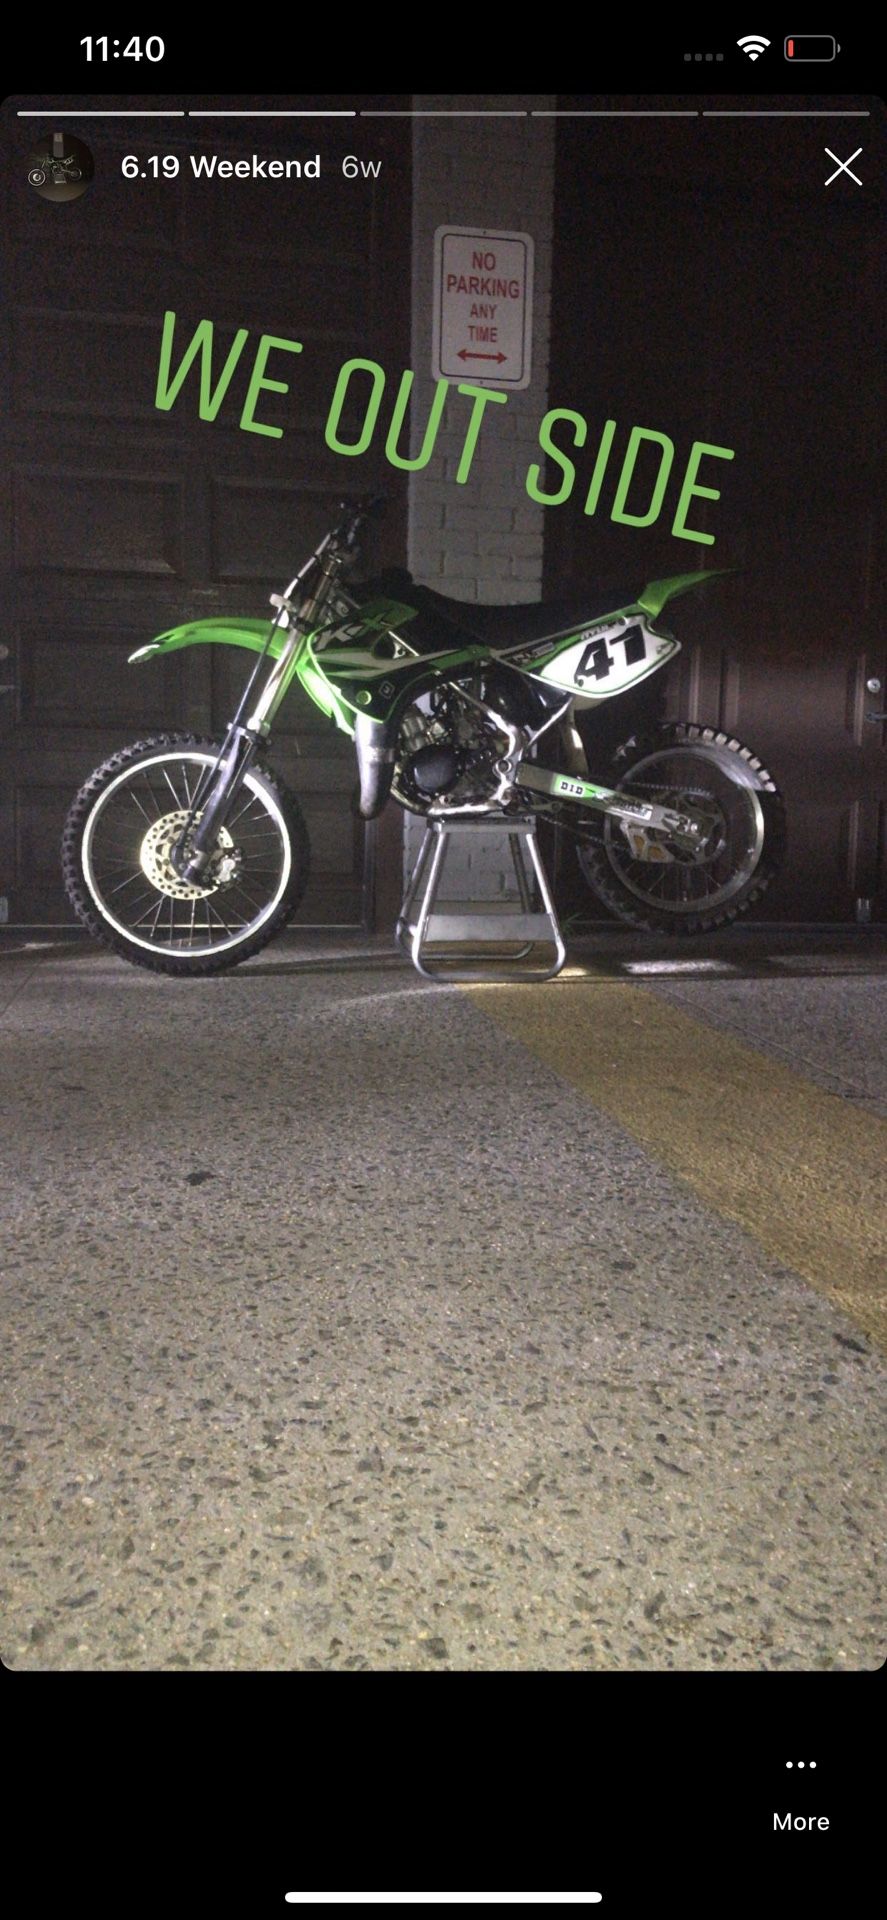 Kx 100 looking to trade for a car or cash want 1200